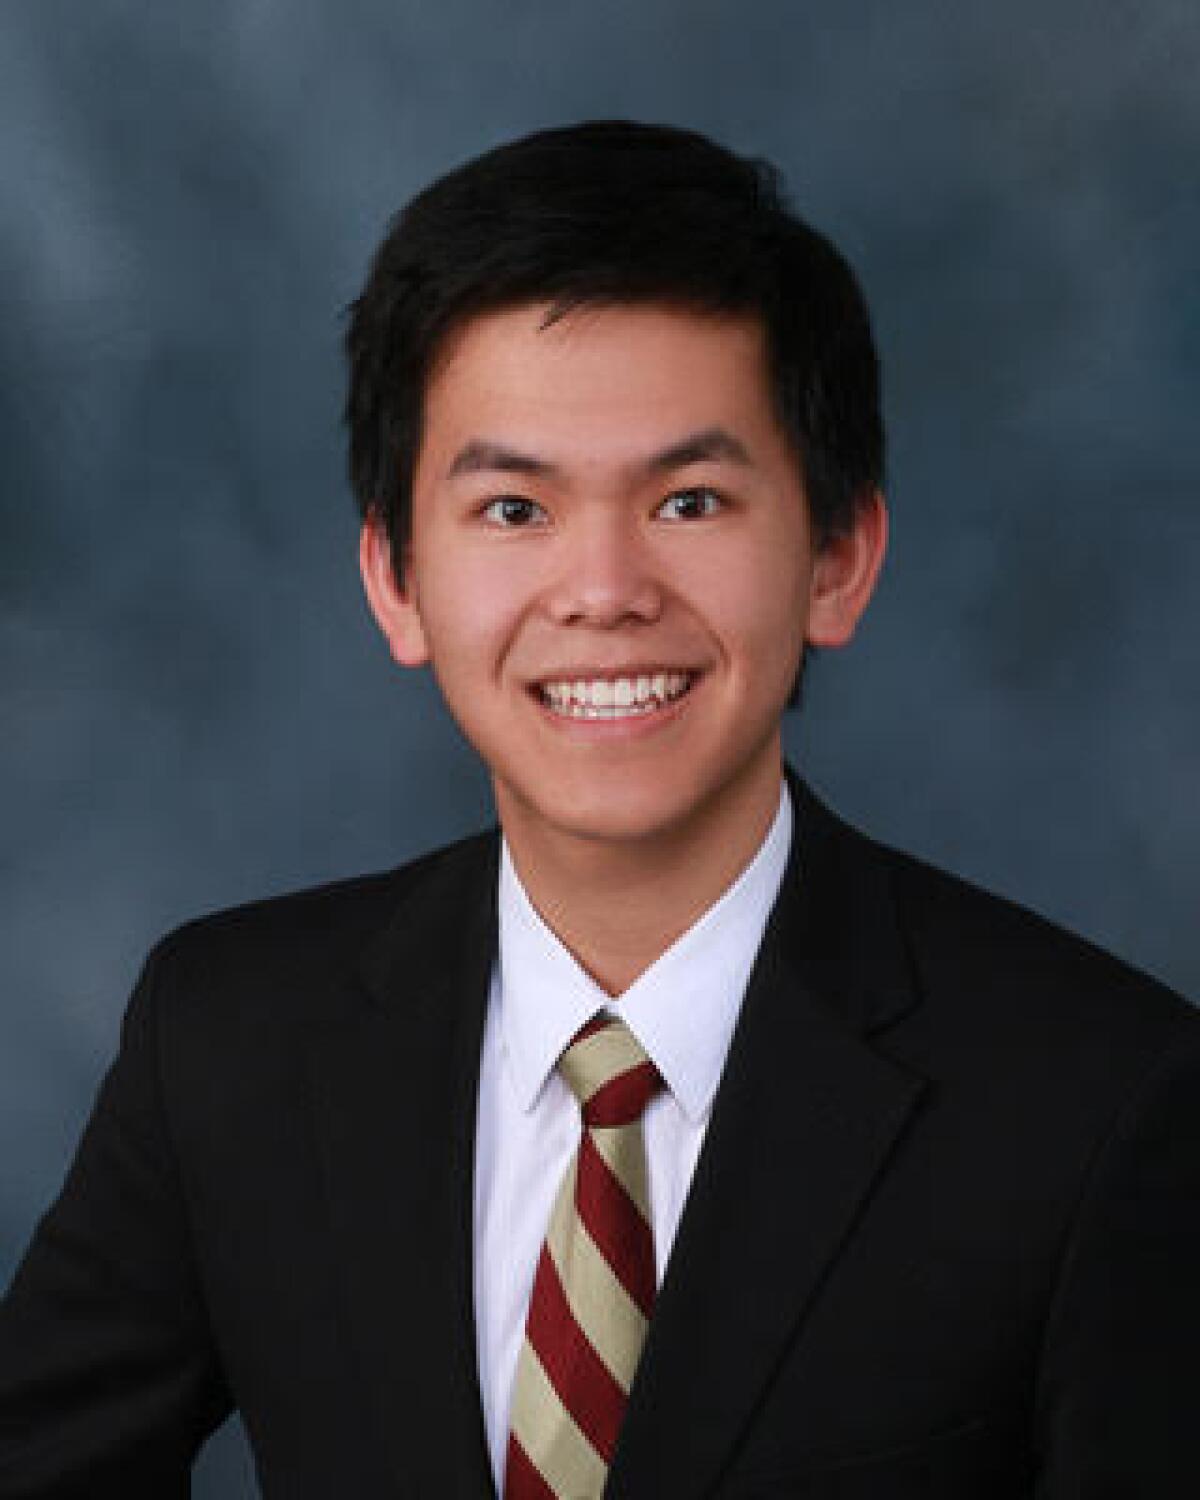 Jeffrey Wang, a senior at The Bishop's School, was a finalist in the 2021 Regeneron Science Talent Search.